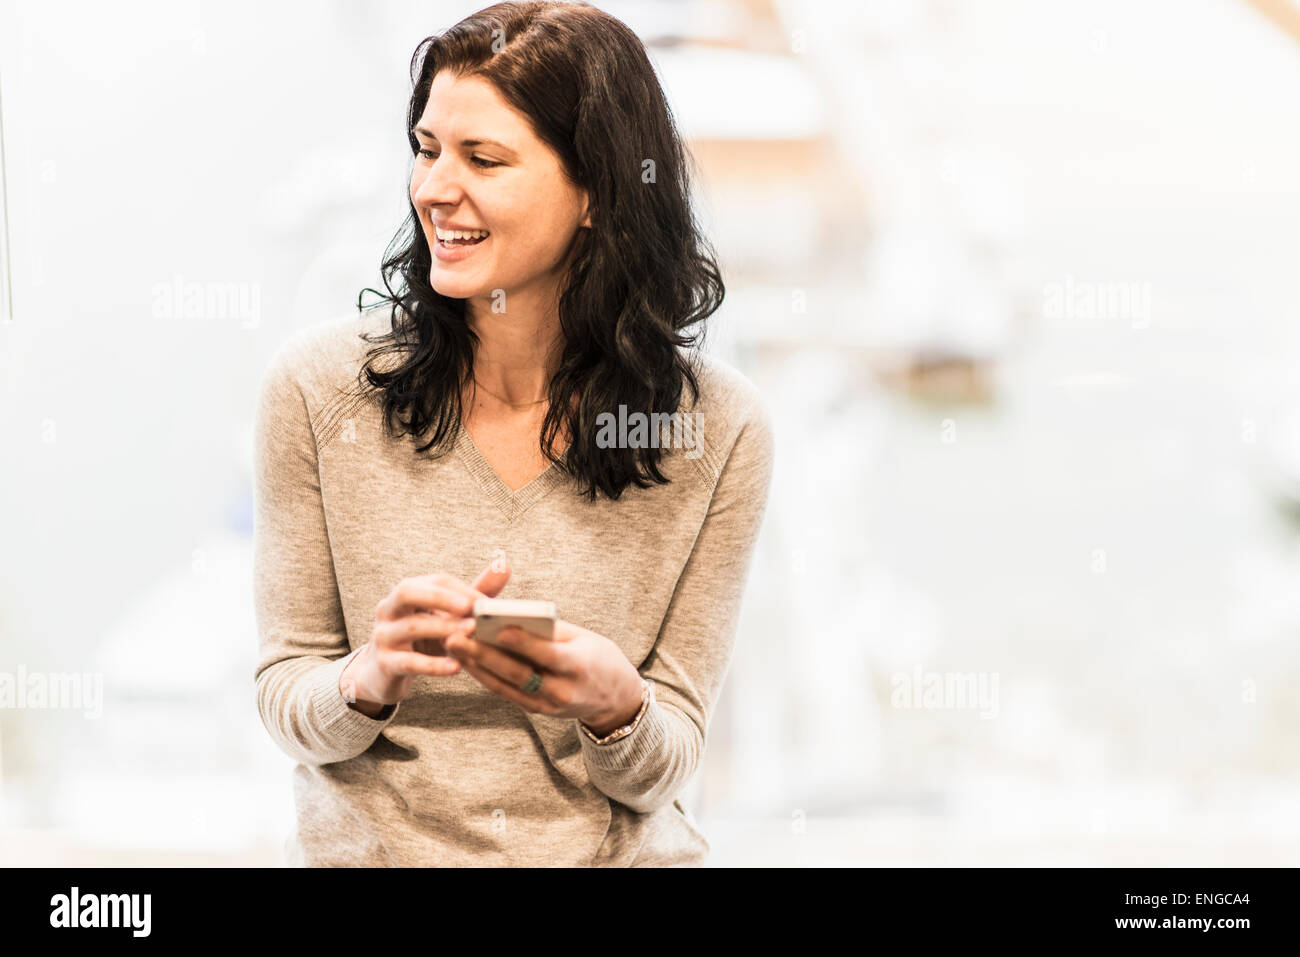 A business woman seated by a window using her smart phone. Stock Photo